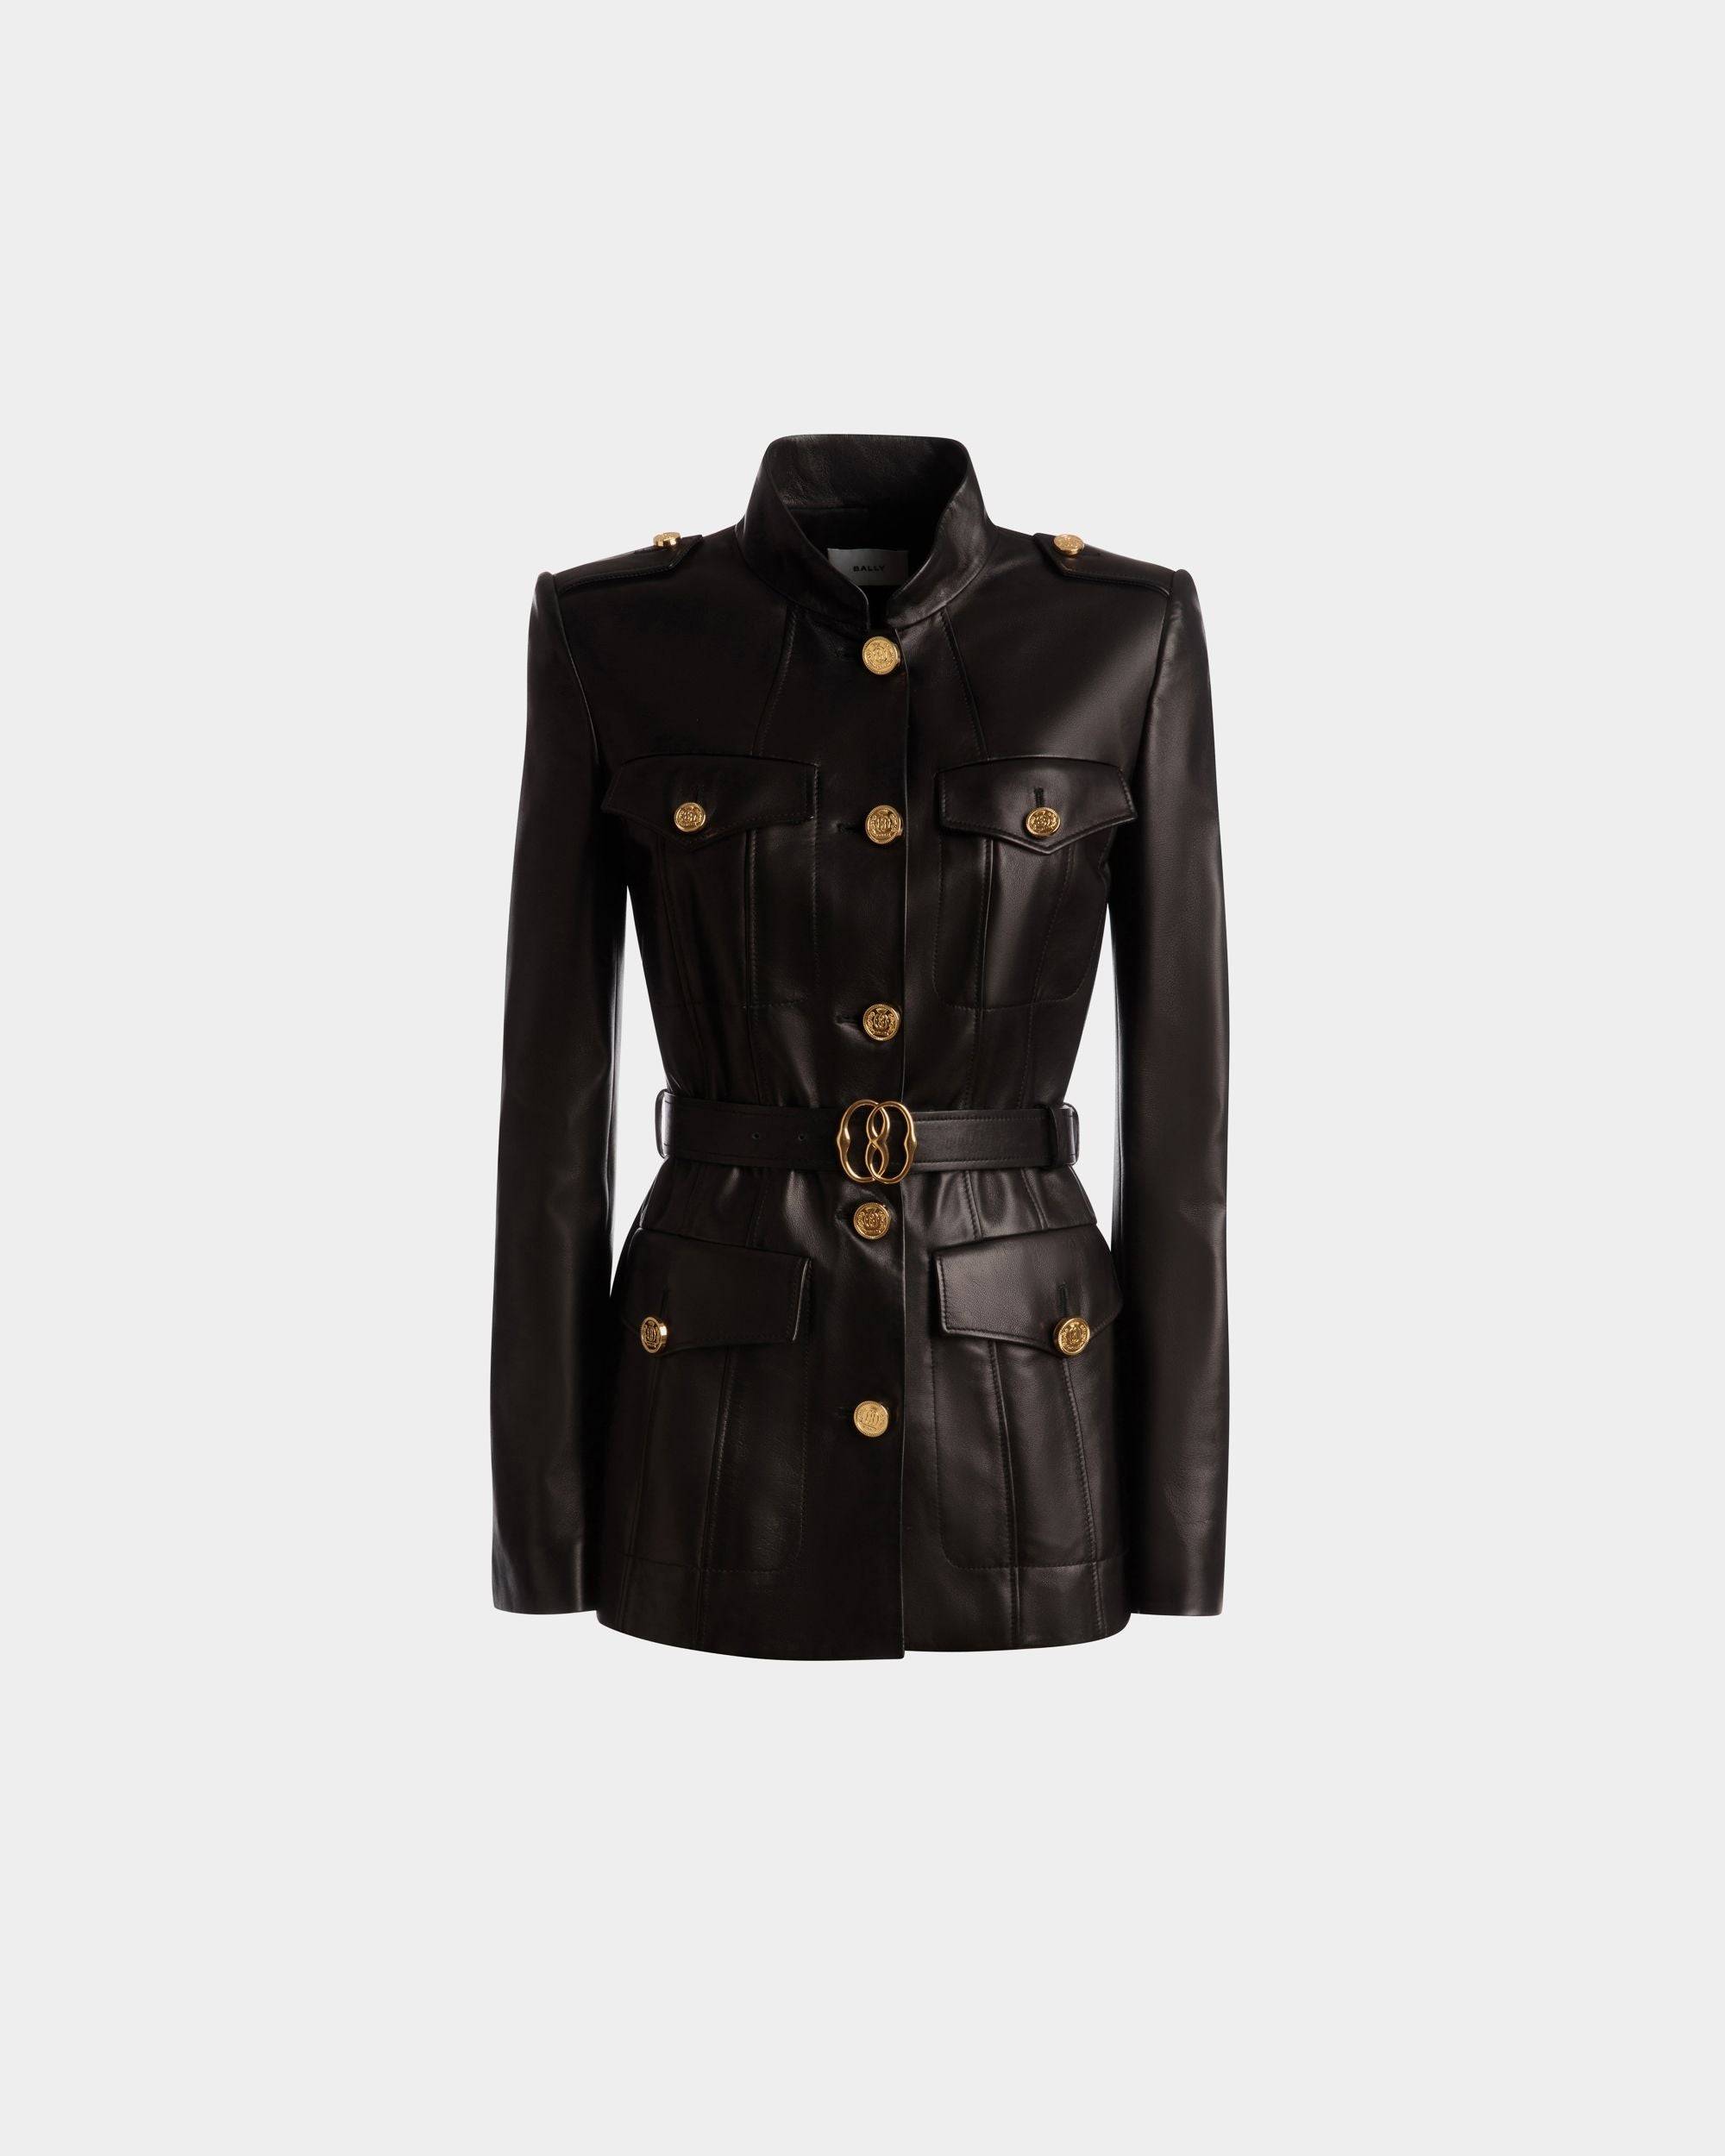 Women's Belted Jacket In Black Leather | Bally | Still Life Front